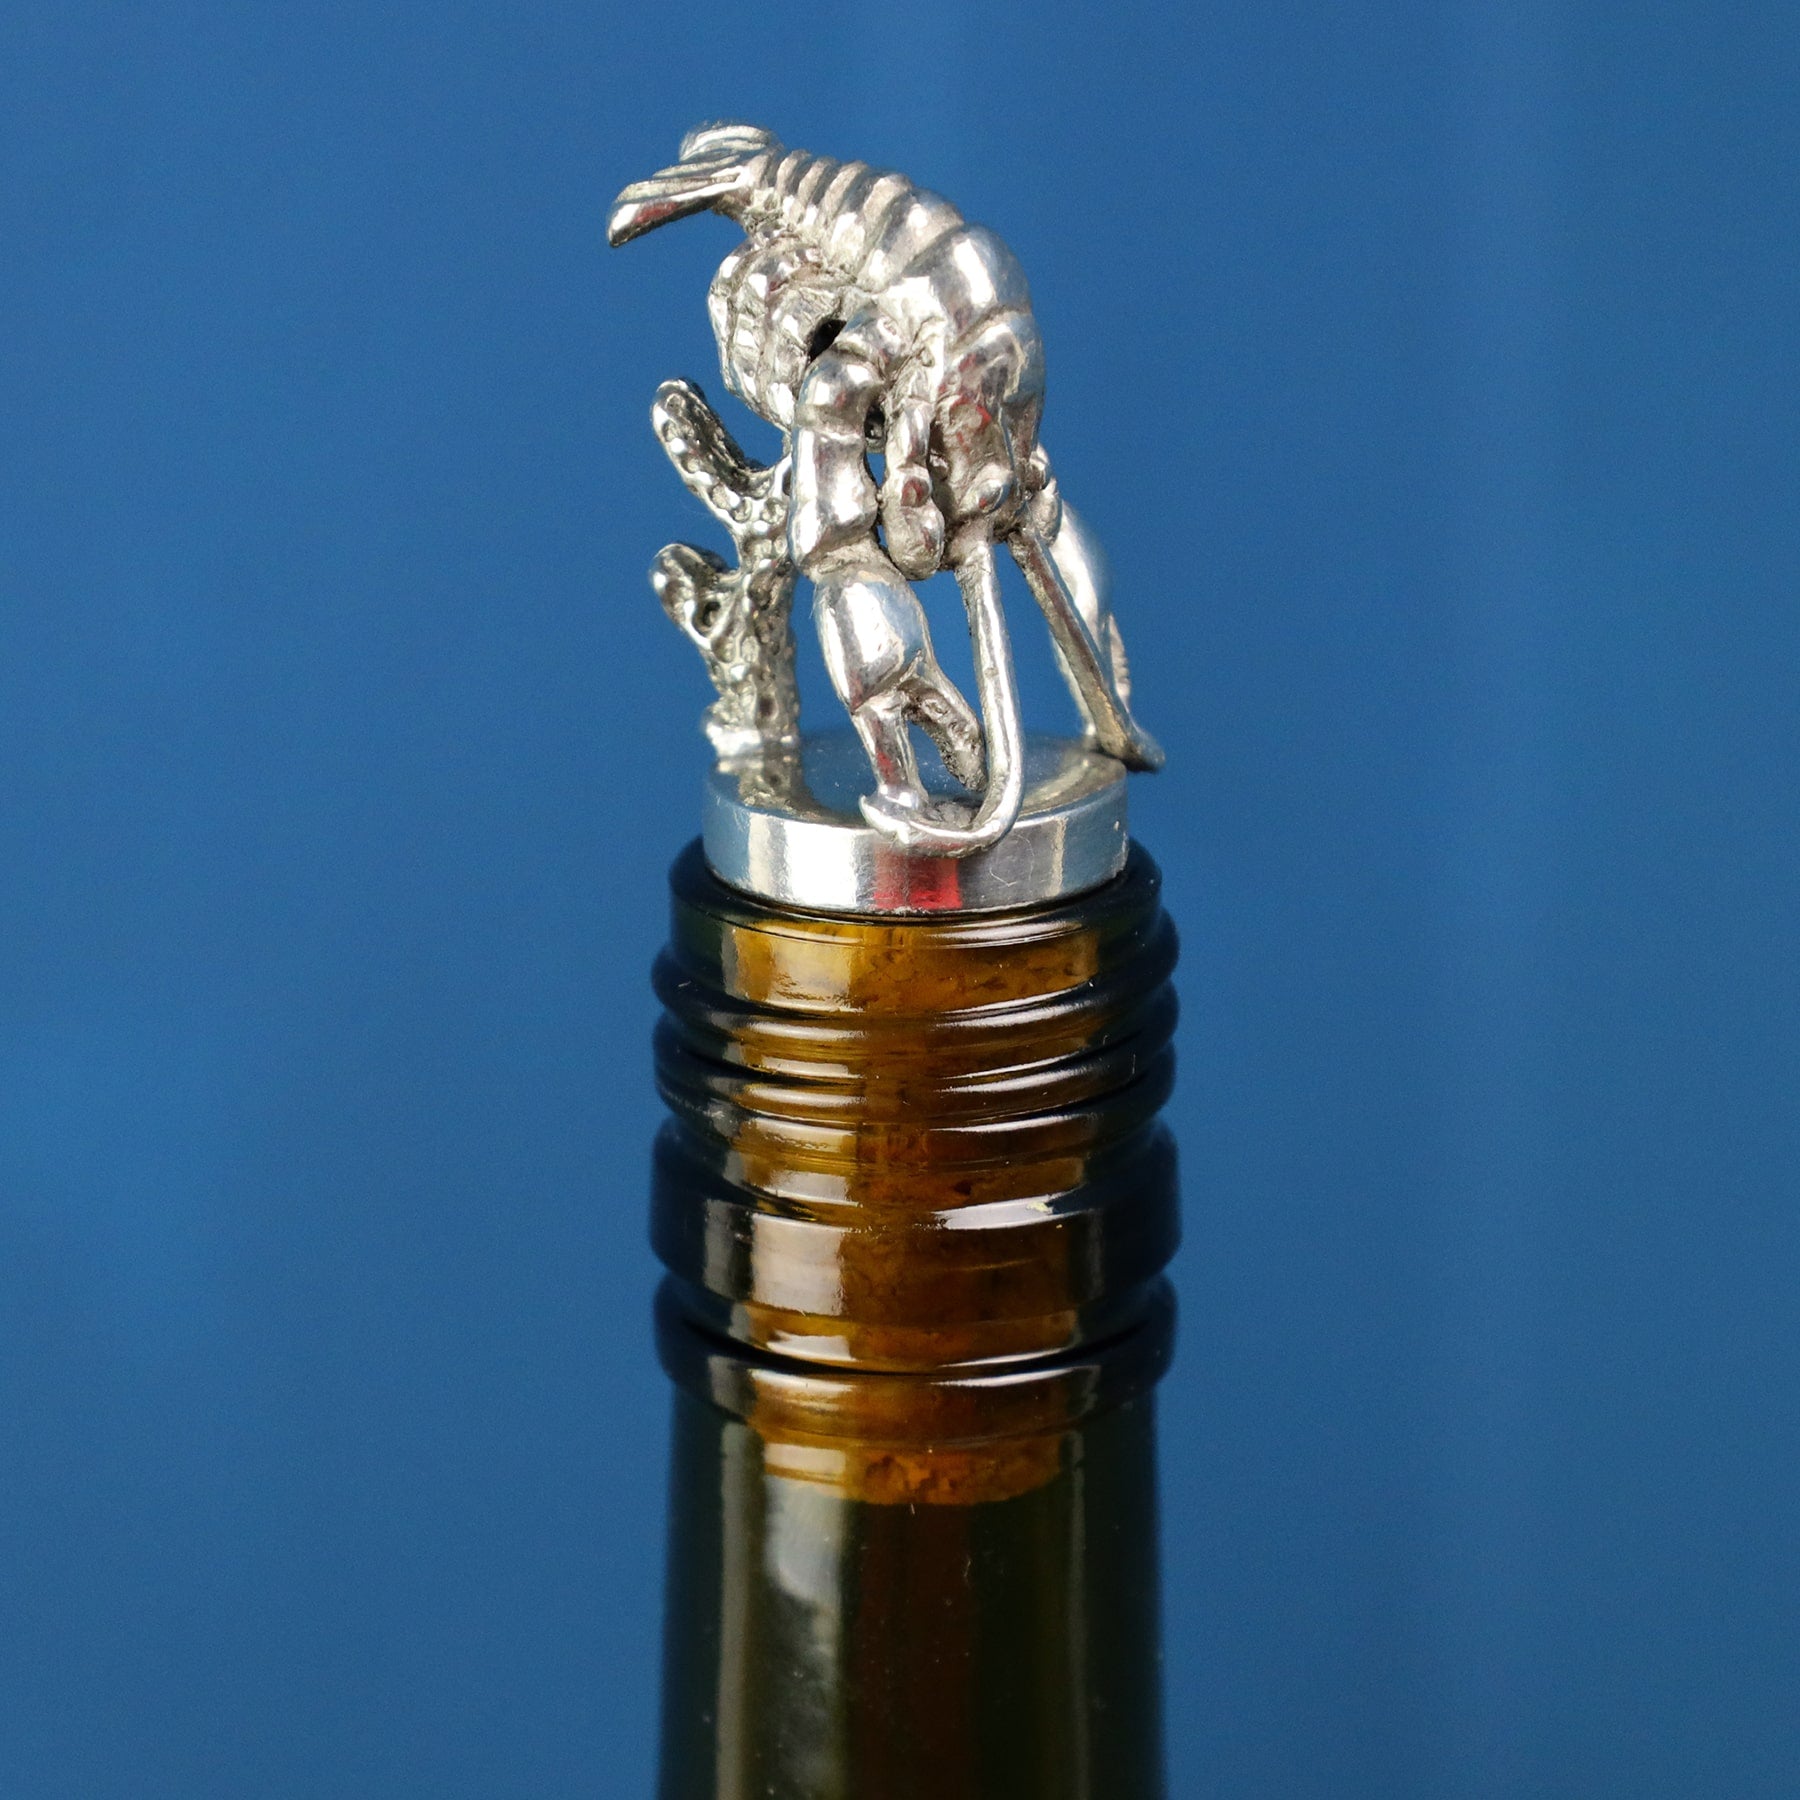 Pewter Lobster shaped Cork Stopper with body standing up placed in the top of a brown wine bottle